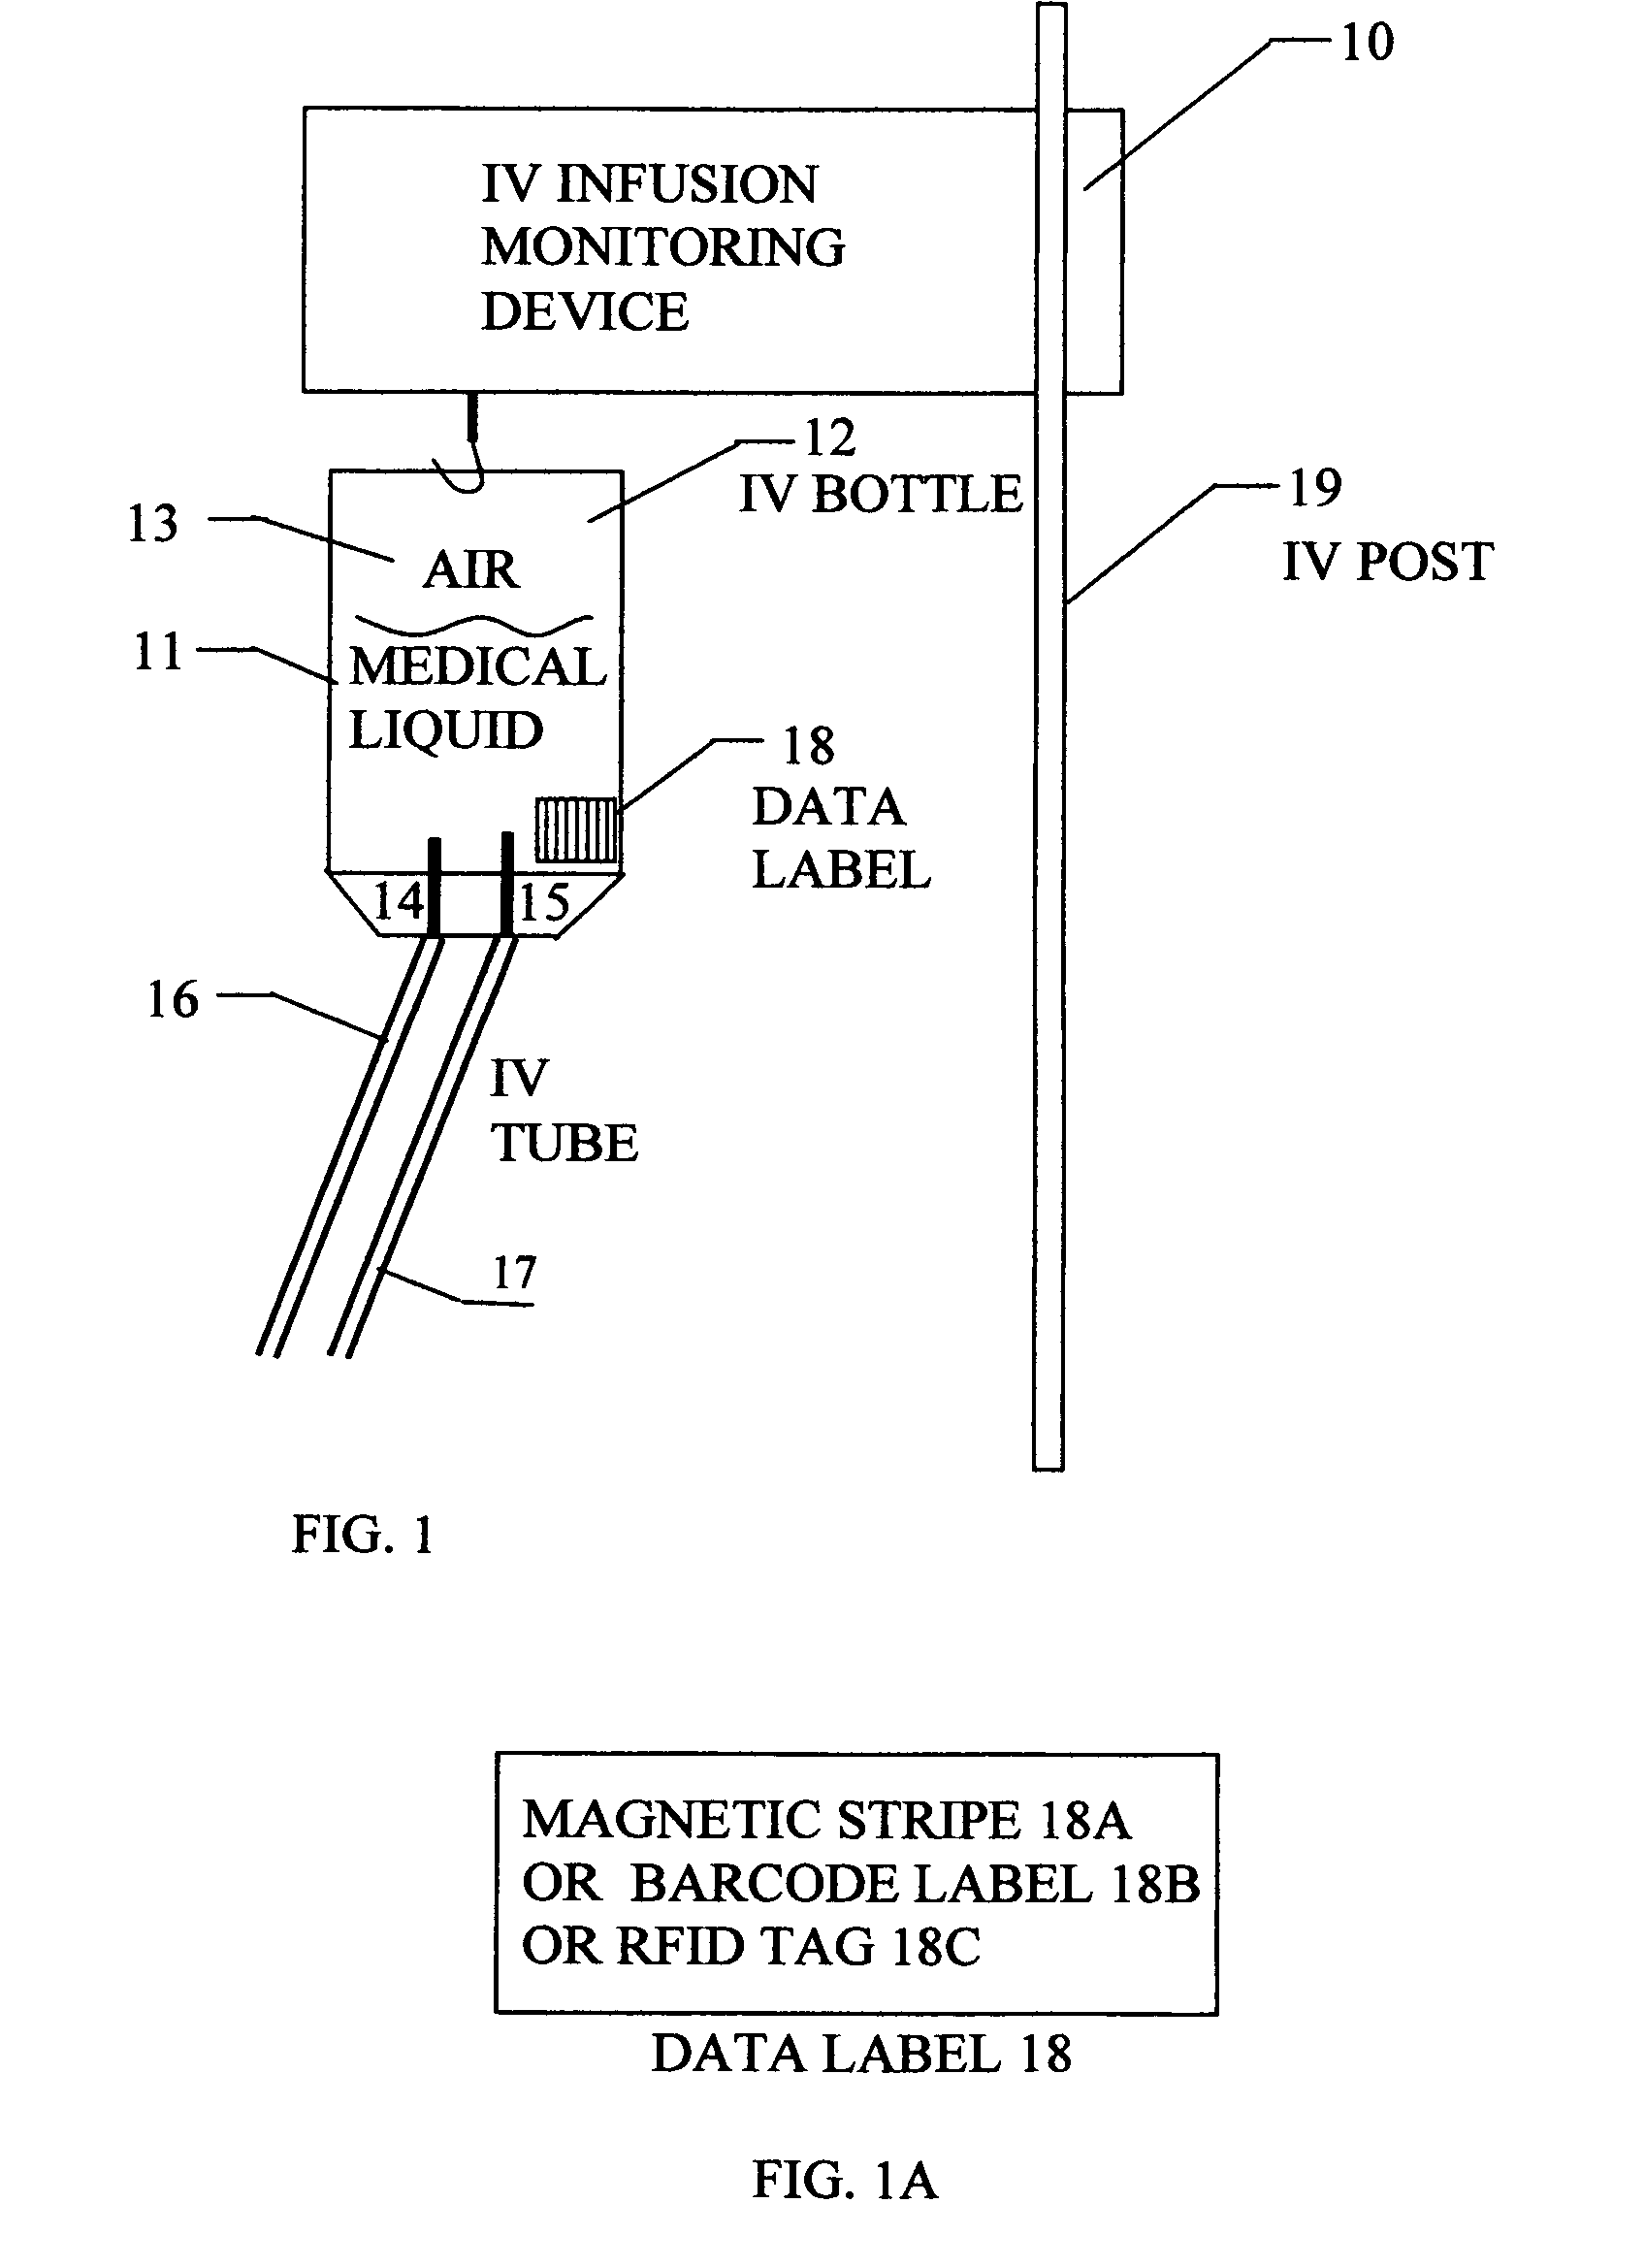 IV infusion monitoring device